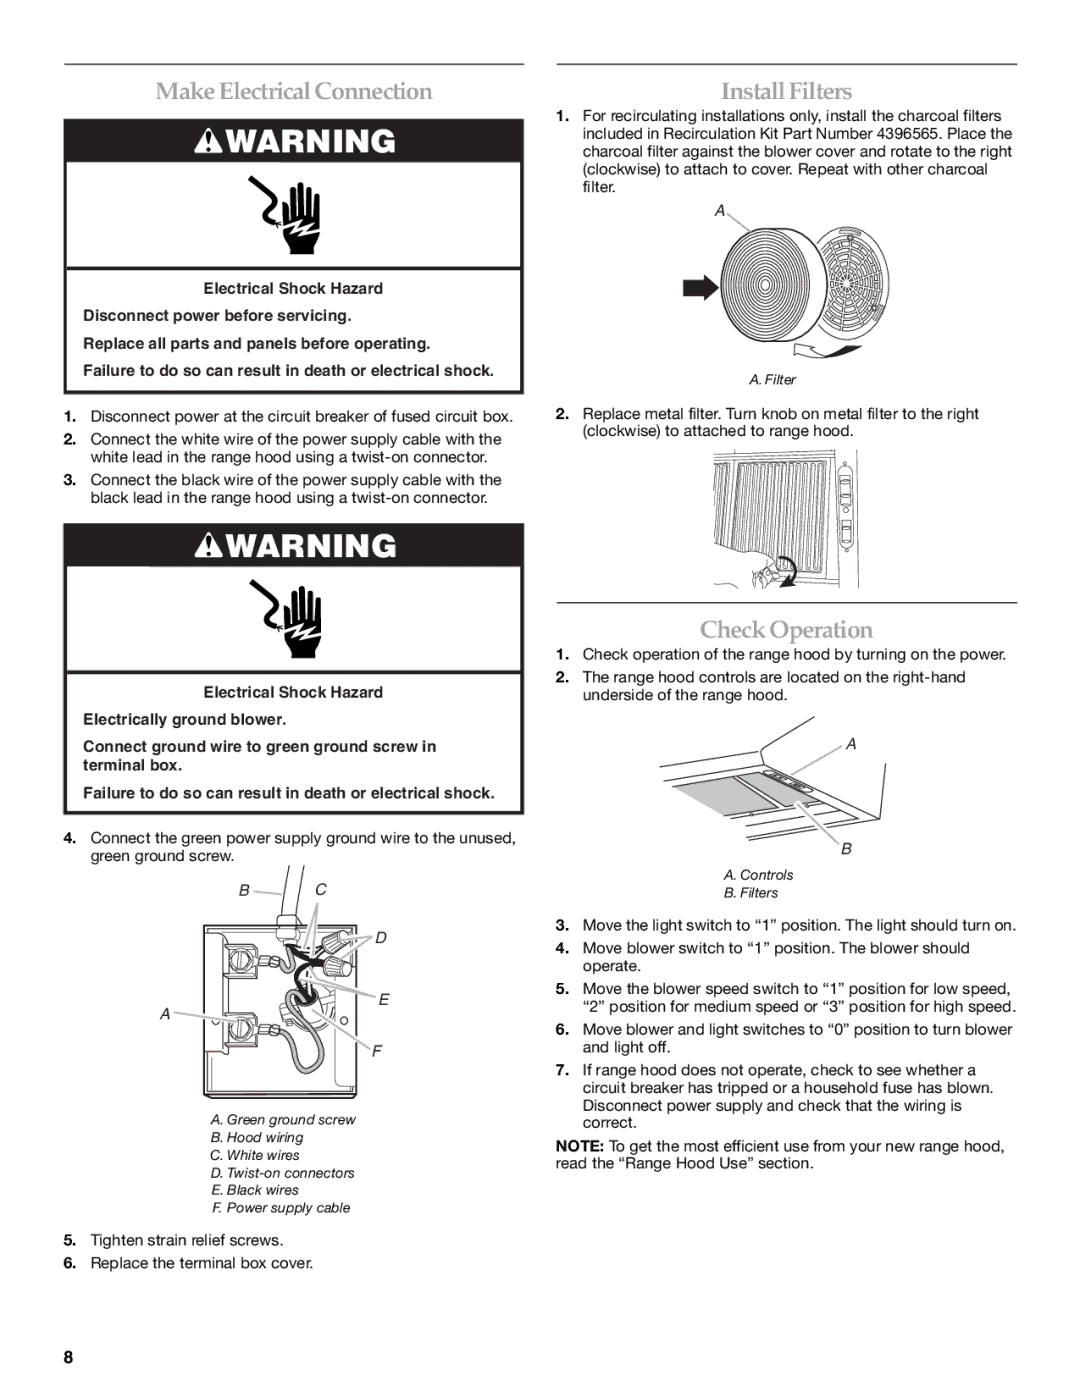 KitchenAid RangeHood installation instructions Make Electrical Connection, Install Filters, Check Operation 